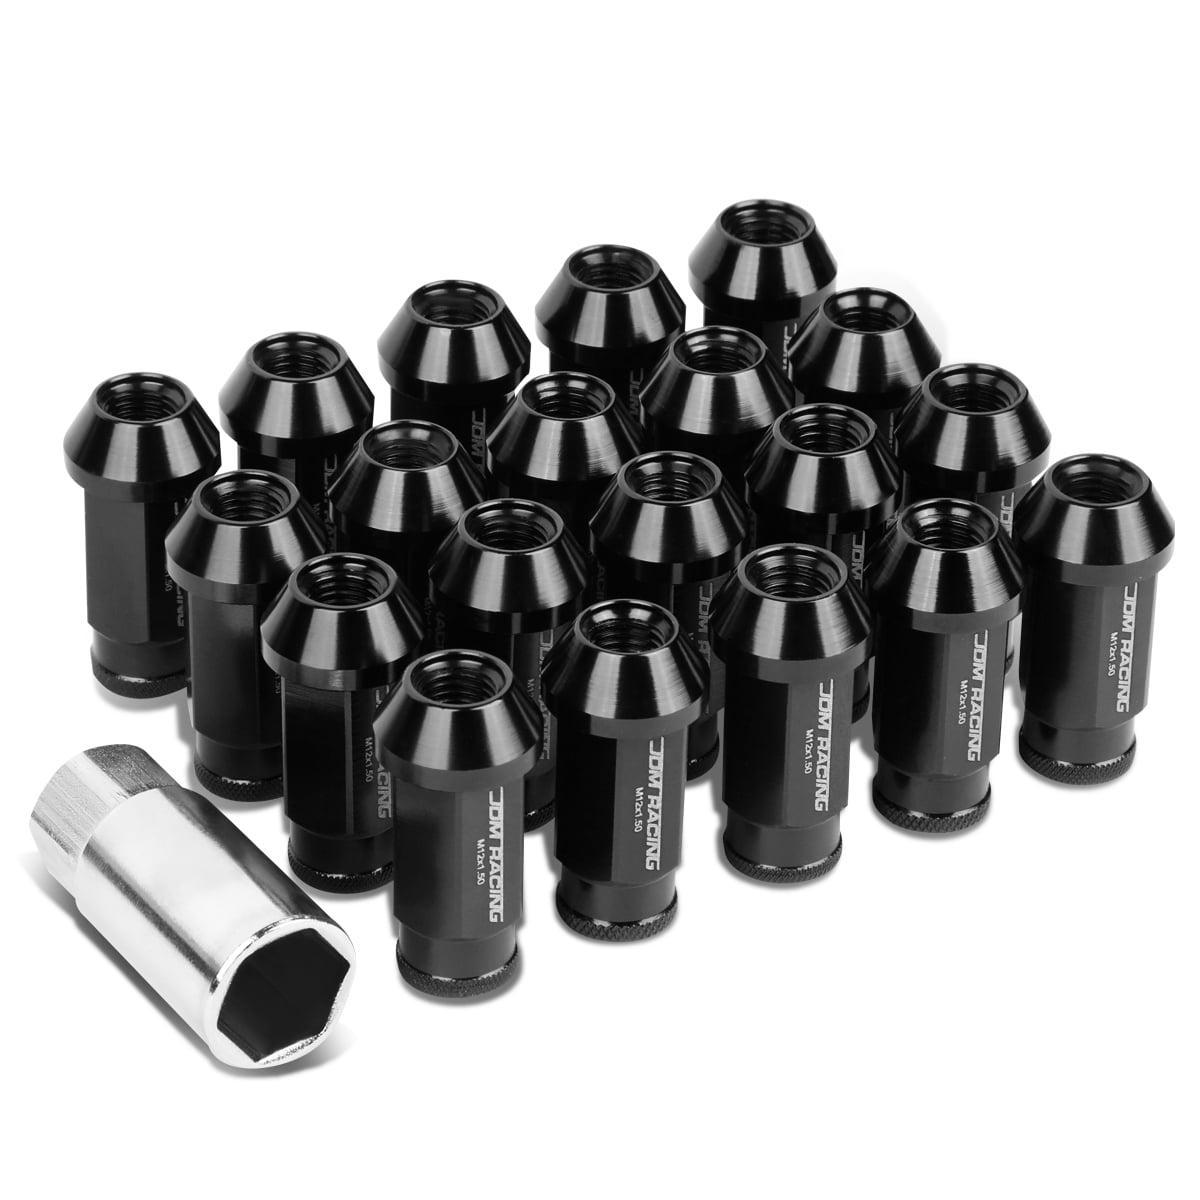 16 Alloy Wheel Bolts Black 12x1.5 Nuts for Vauxhall Signum 03-08 